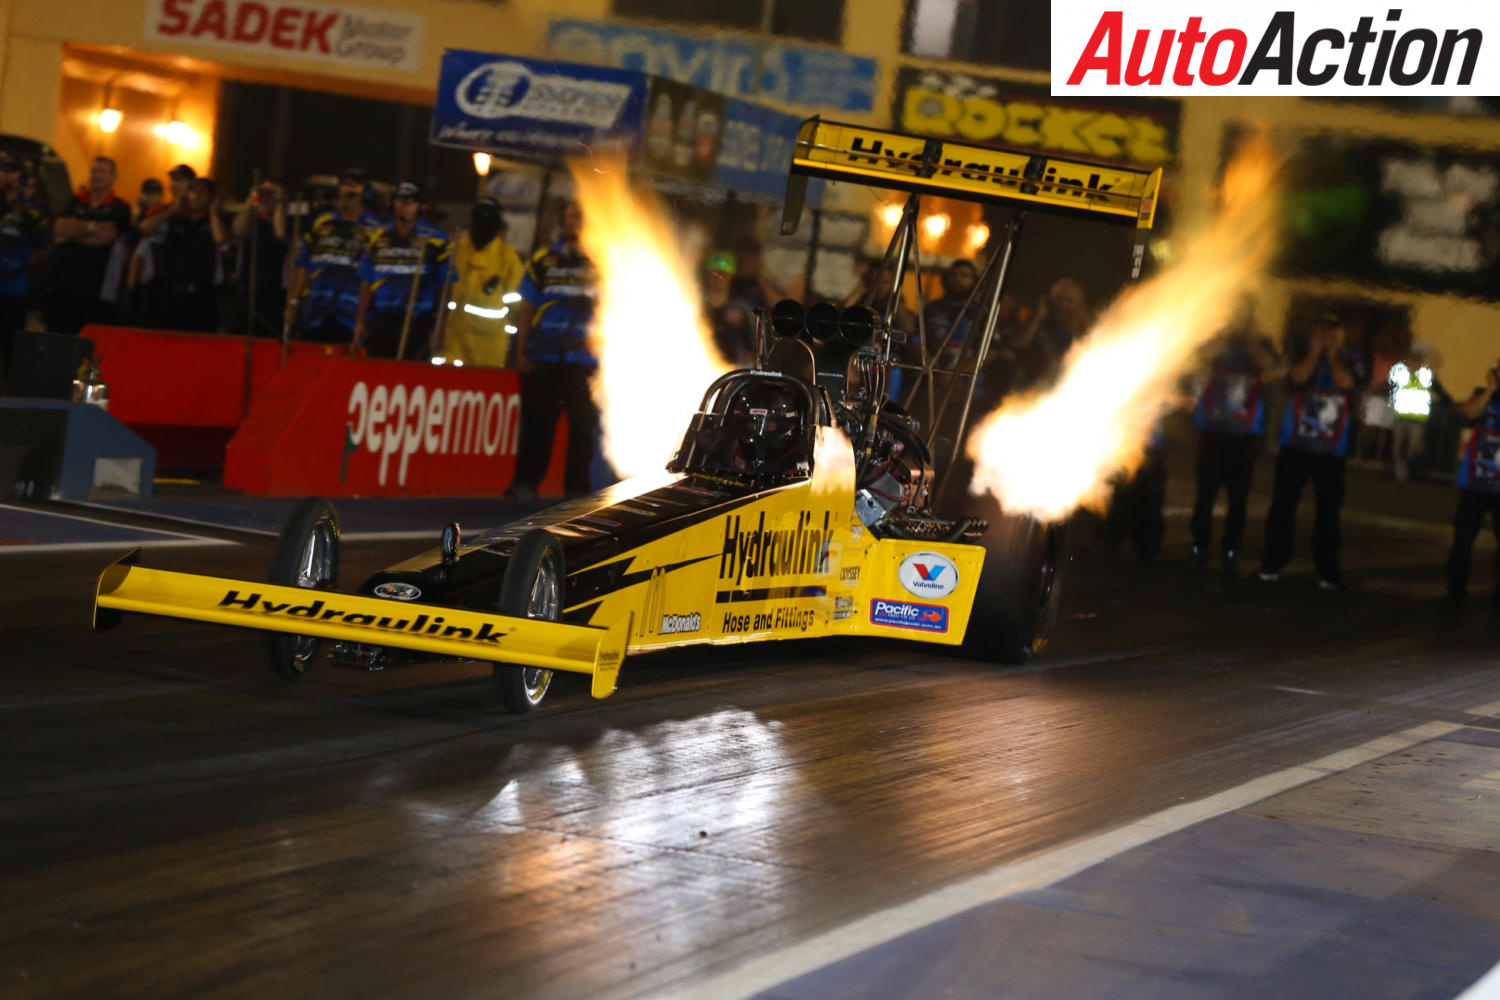 NEW NATIONAL DRAG RACING CHAMPIONSHIP ANNOUNCED Auto Action